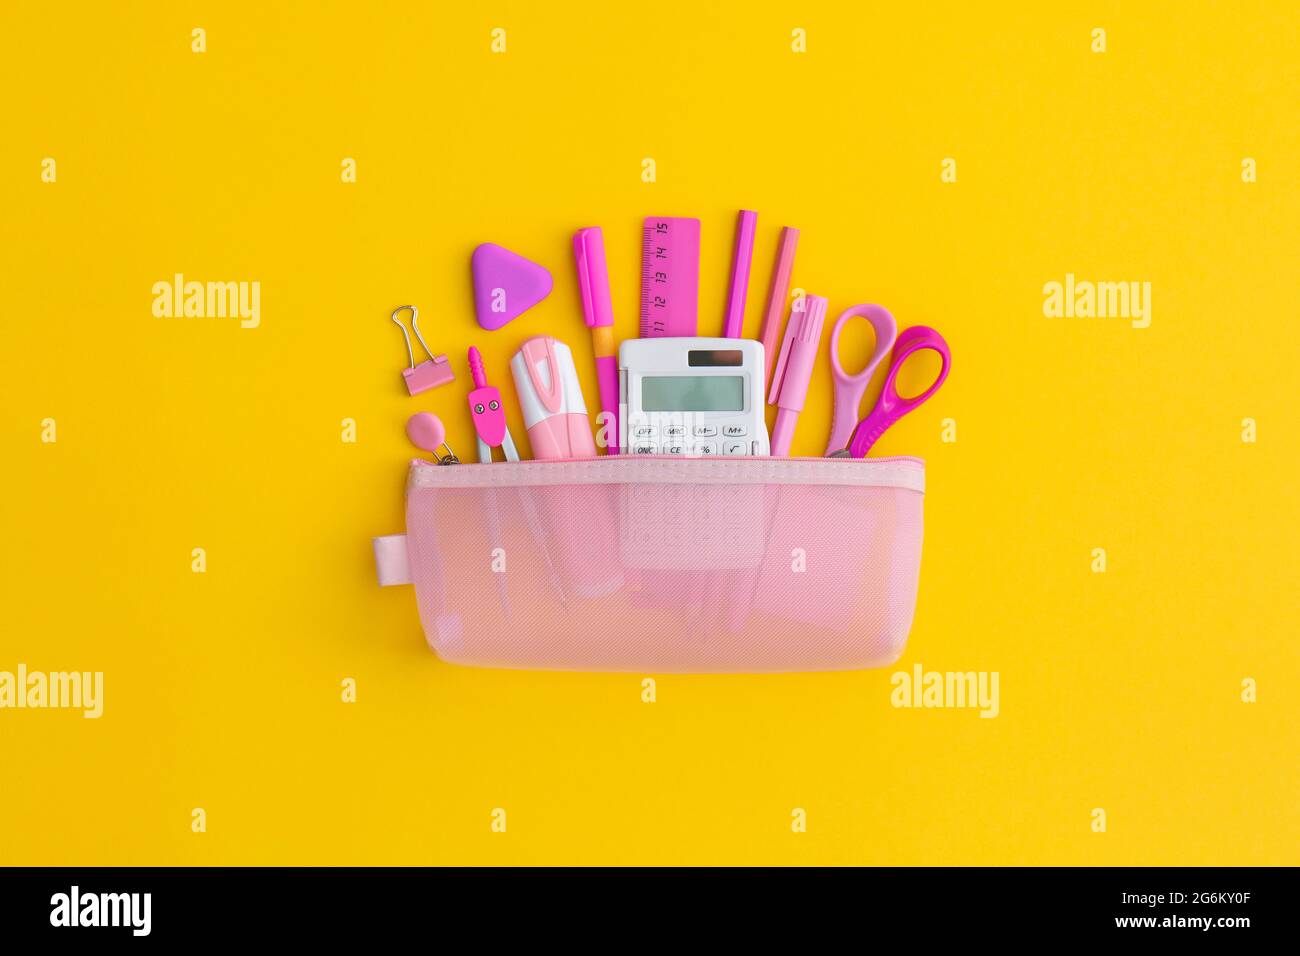 Pencil case with school stationery on a yellow background. Top view. Flat lay. Back to school concept. Stock Photo